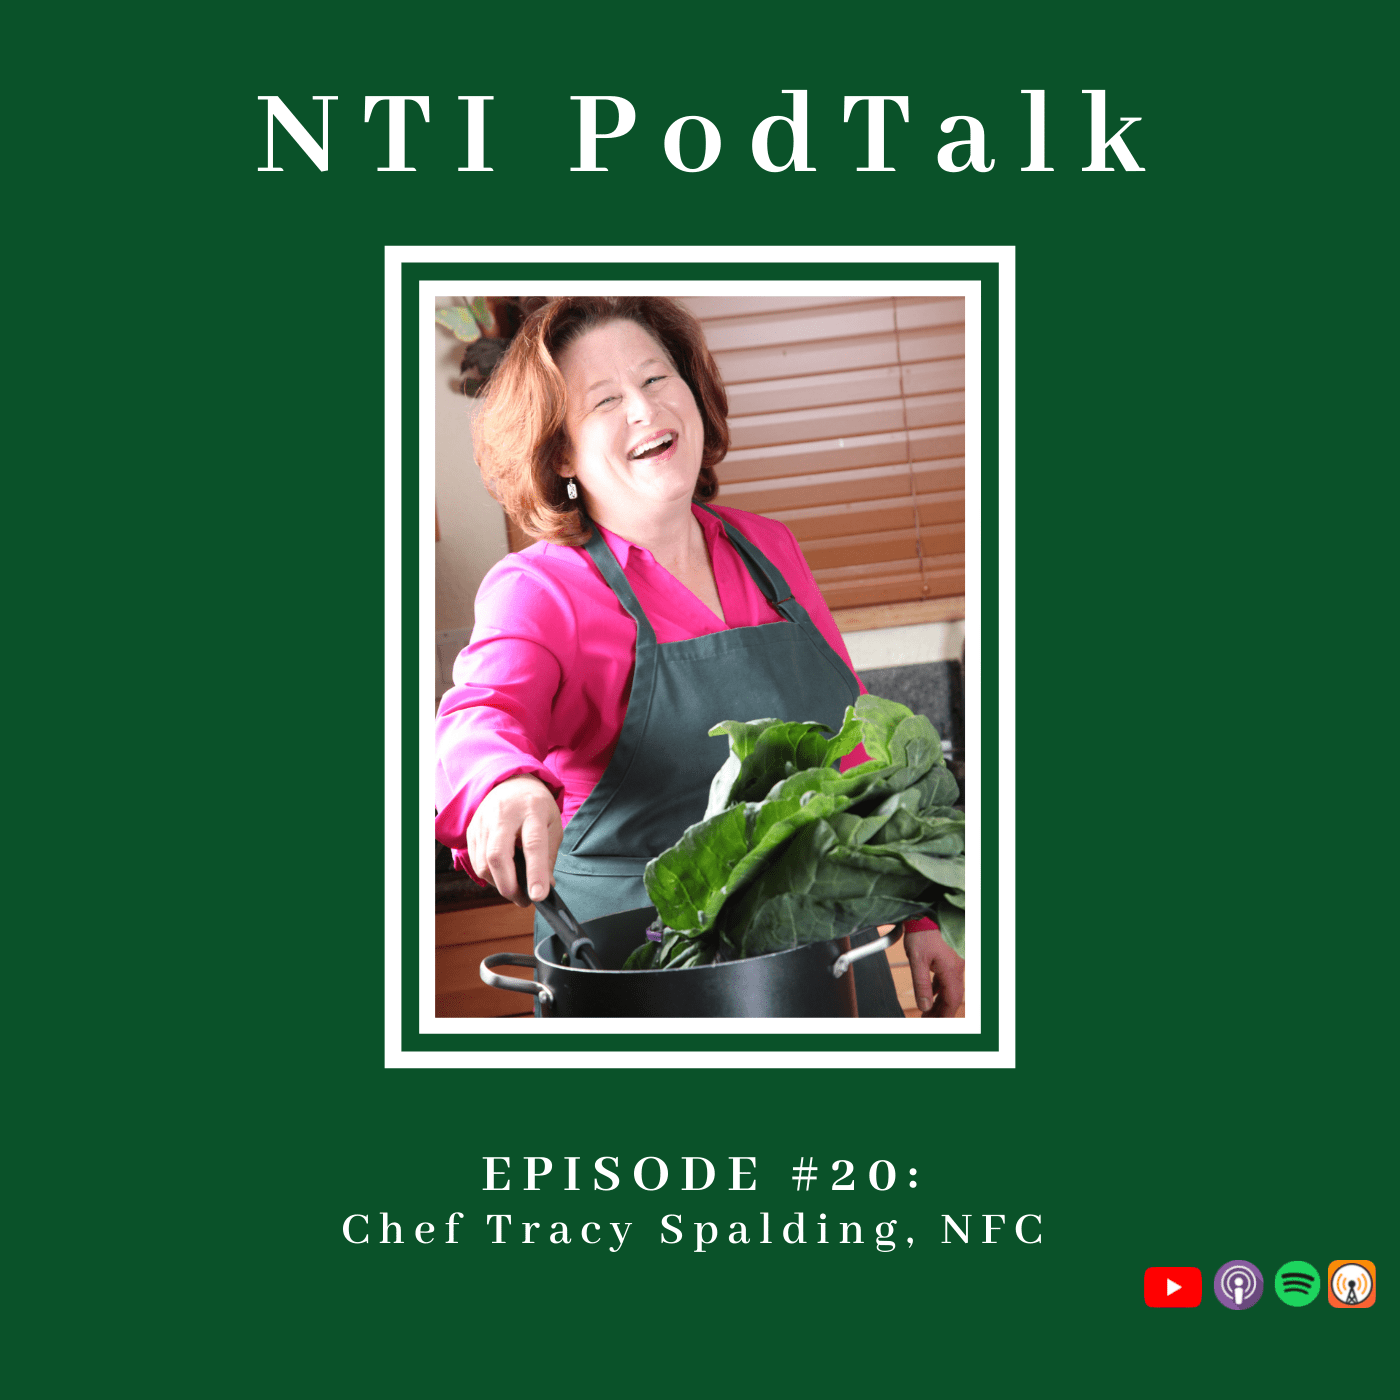 Featured image for “NTI PodTalk with Lead Chef Instructor Tracy Spalding, NFC”